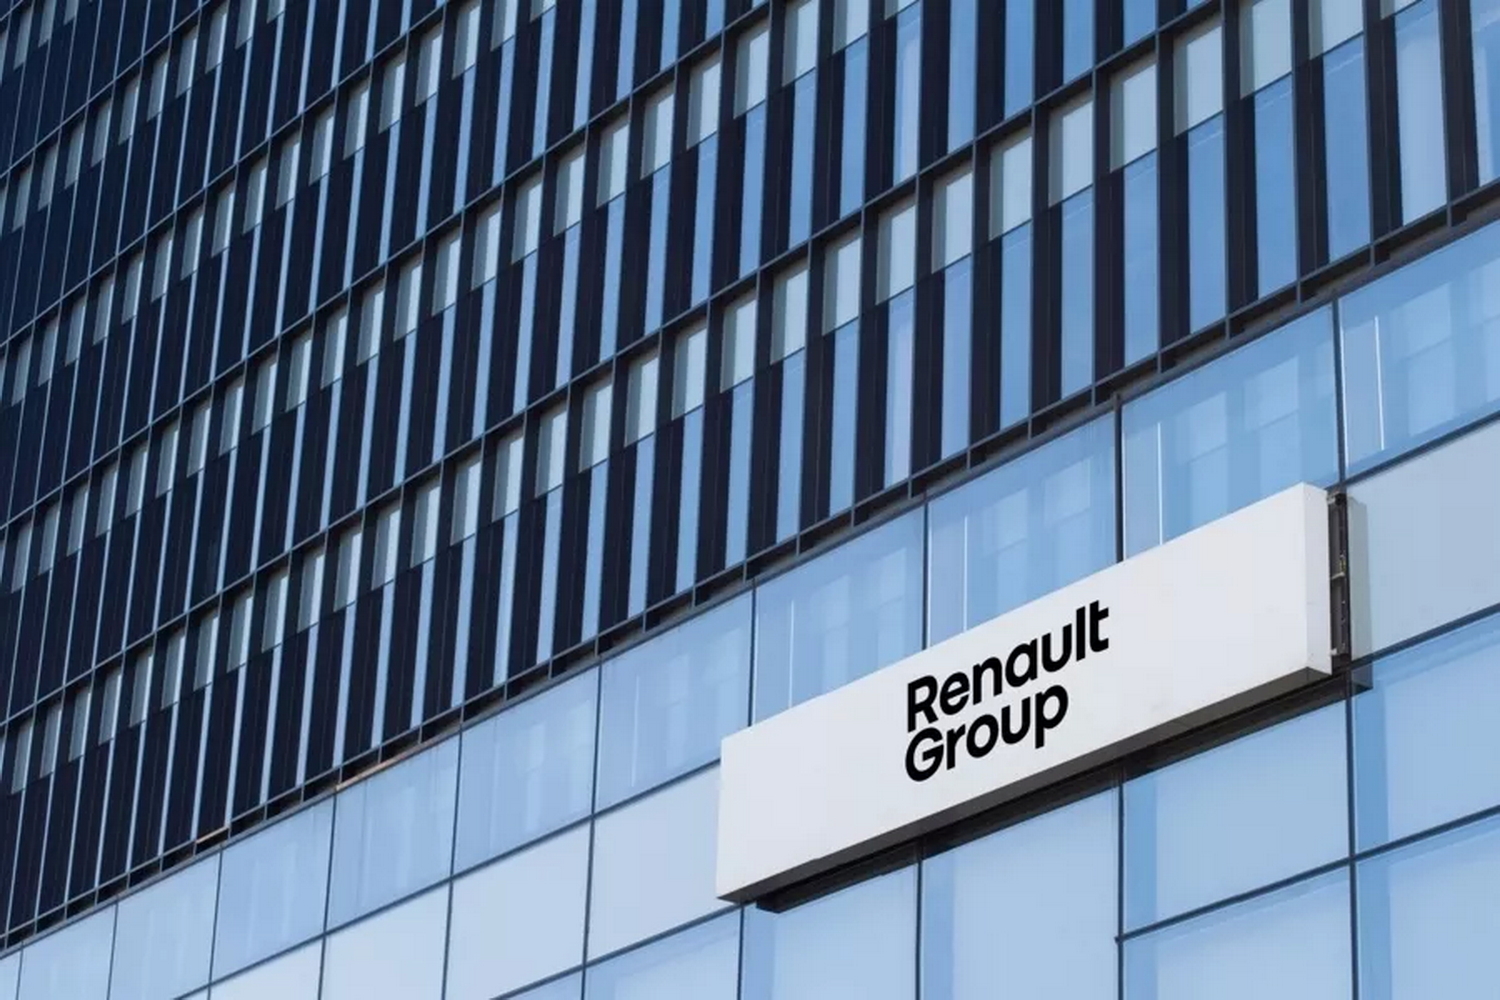 Record month for Renault Group